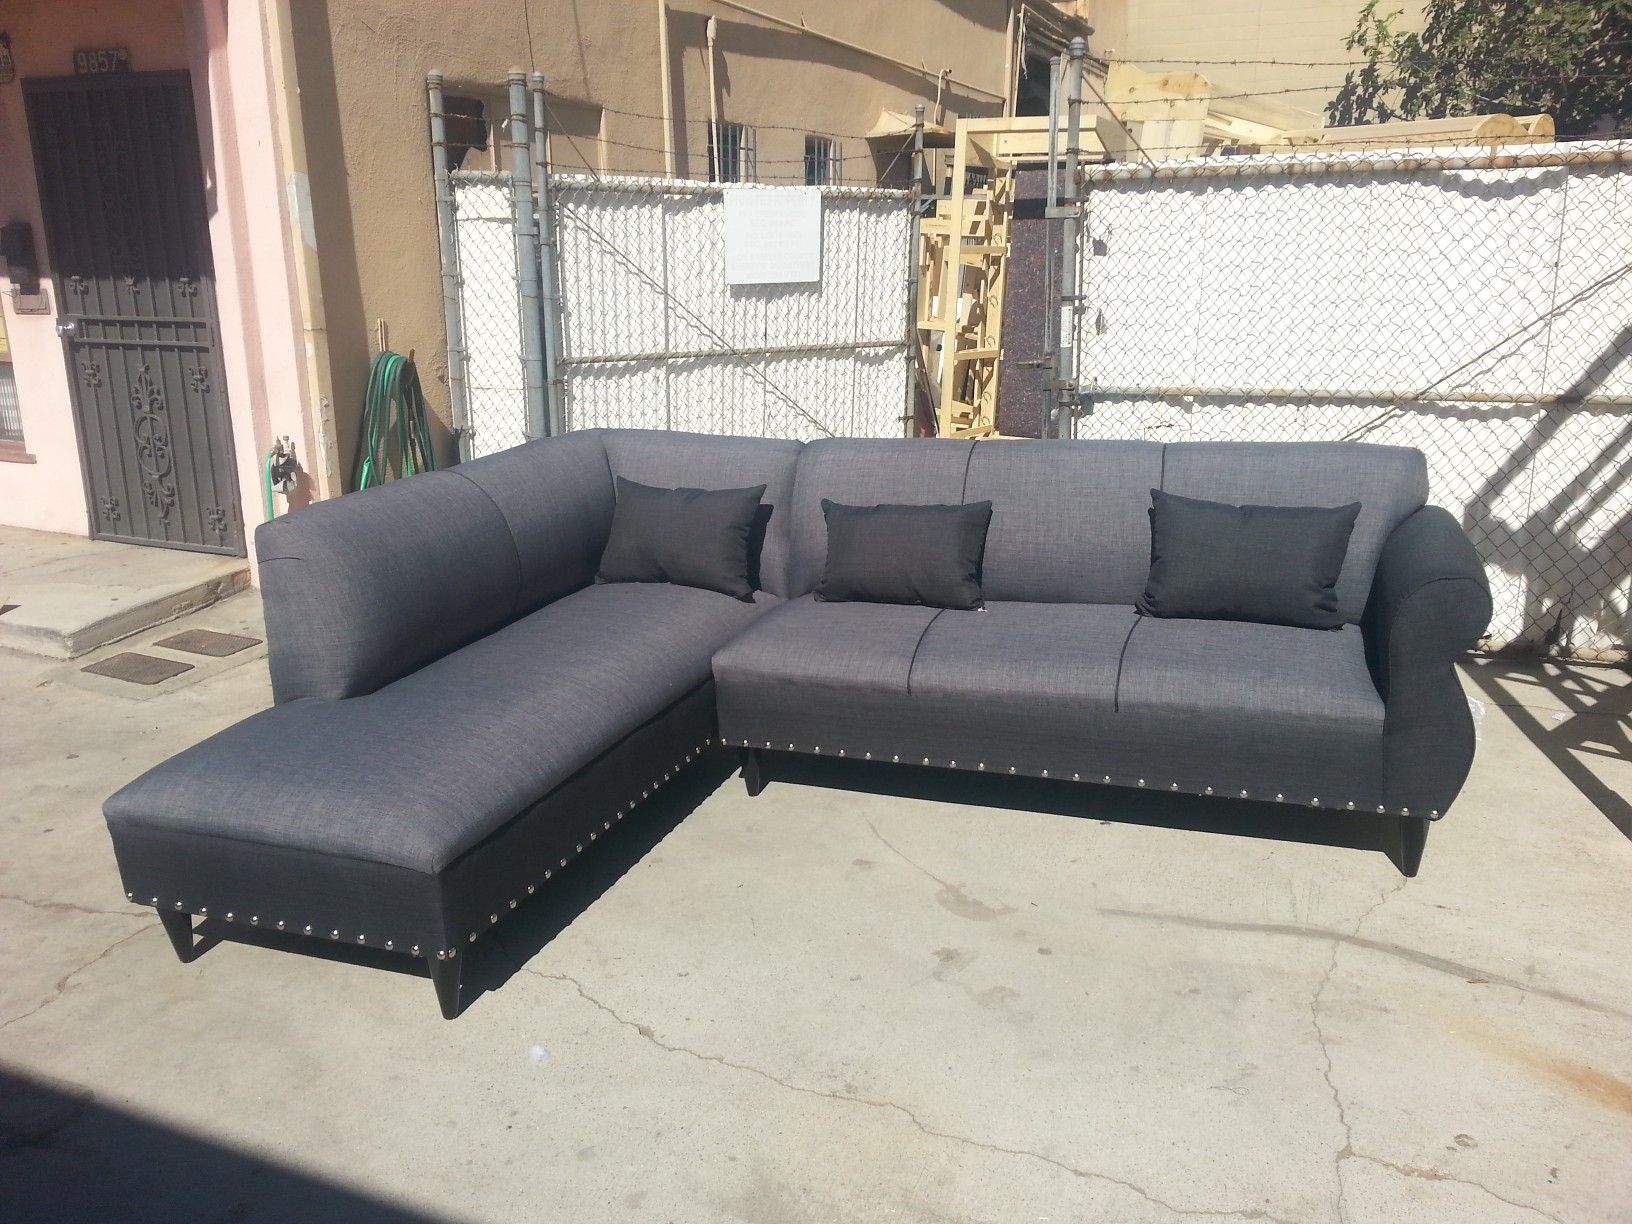 NEW 7X9FT ELITE CHARCOAL FABRIC COMBO SECTIONAL CHAISE